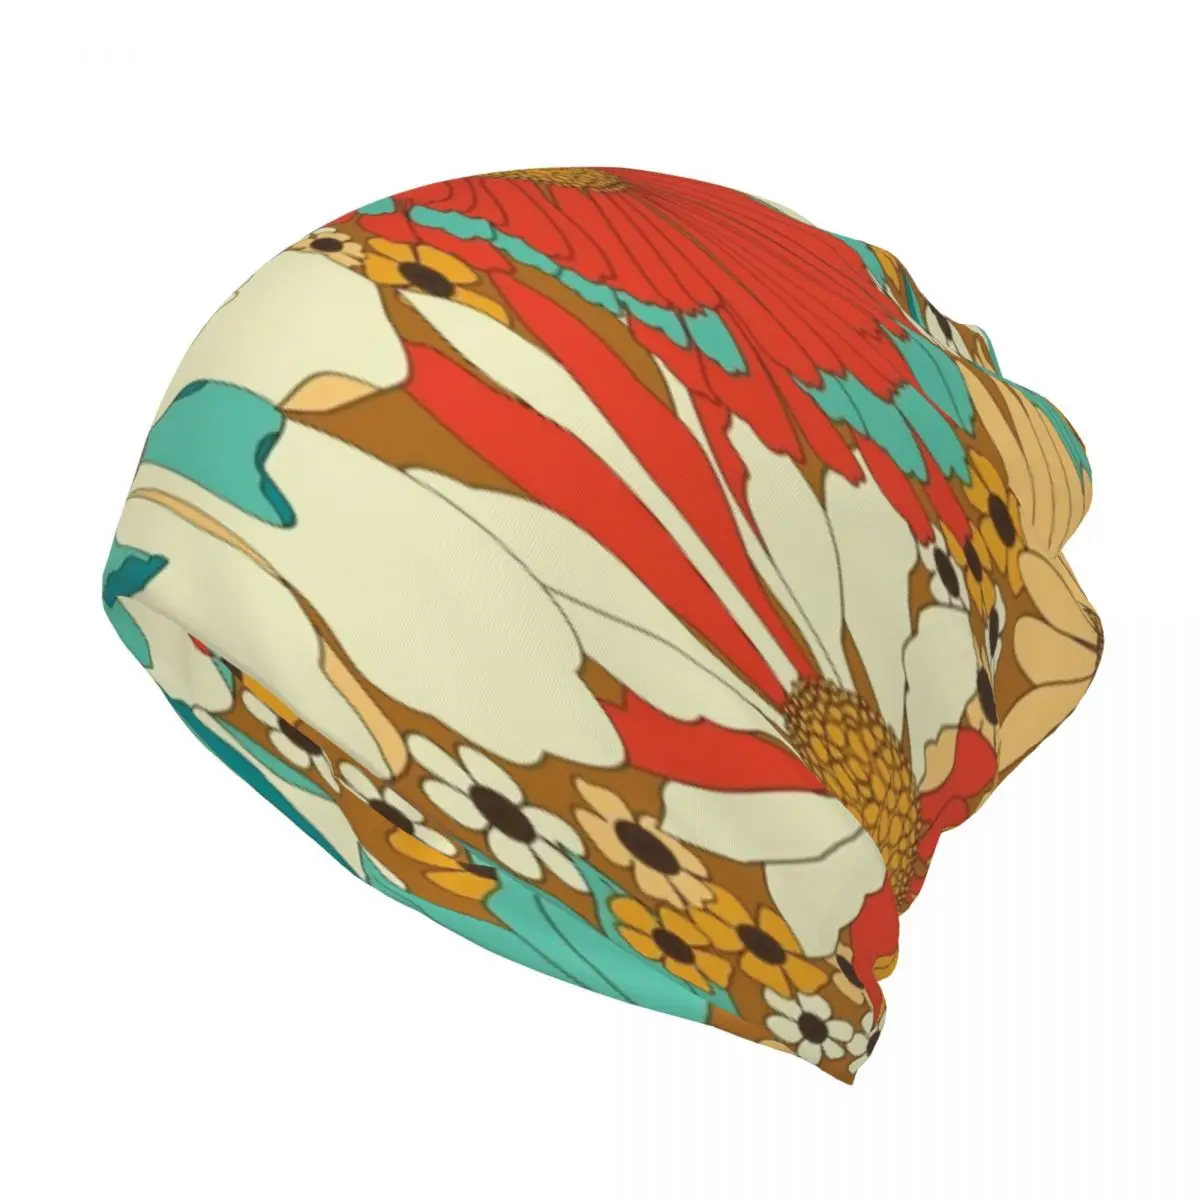 

Red, Orange, Turquoise & Brown Retro Floral Multifunction Beanie Hat Fashionable Unisex For Travel Soft Fabric Nice Gift